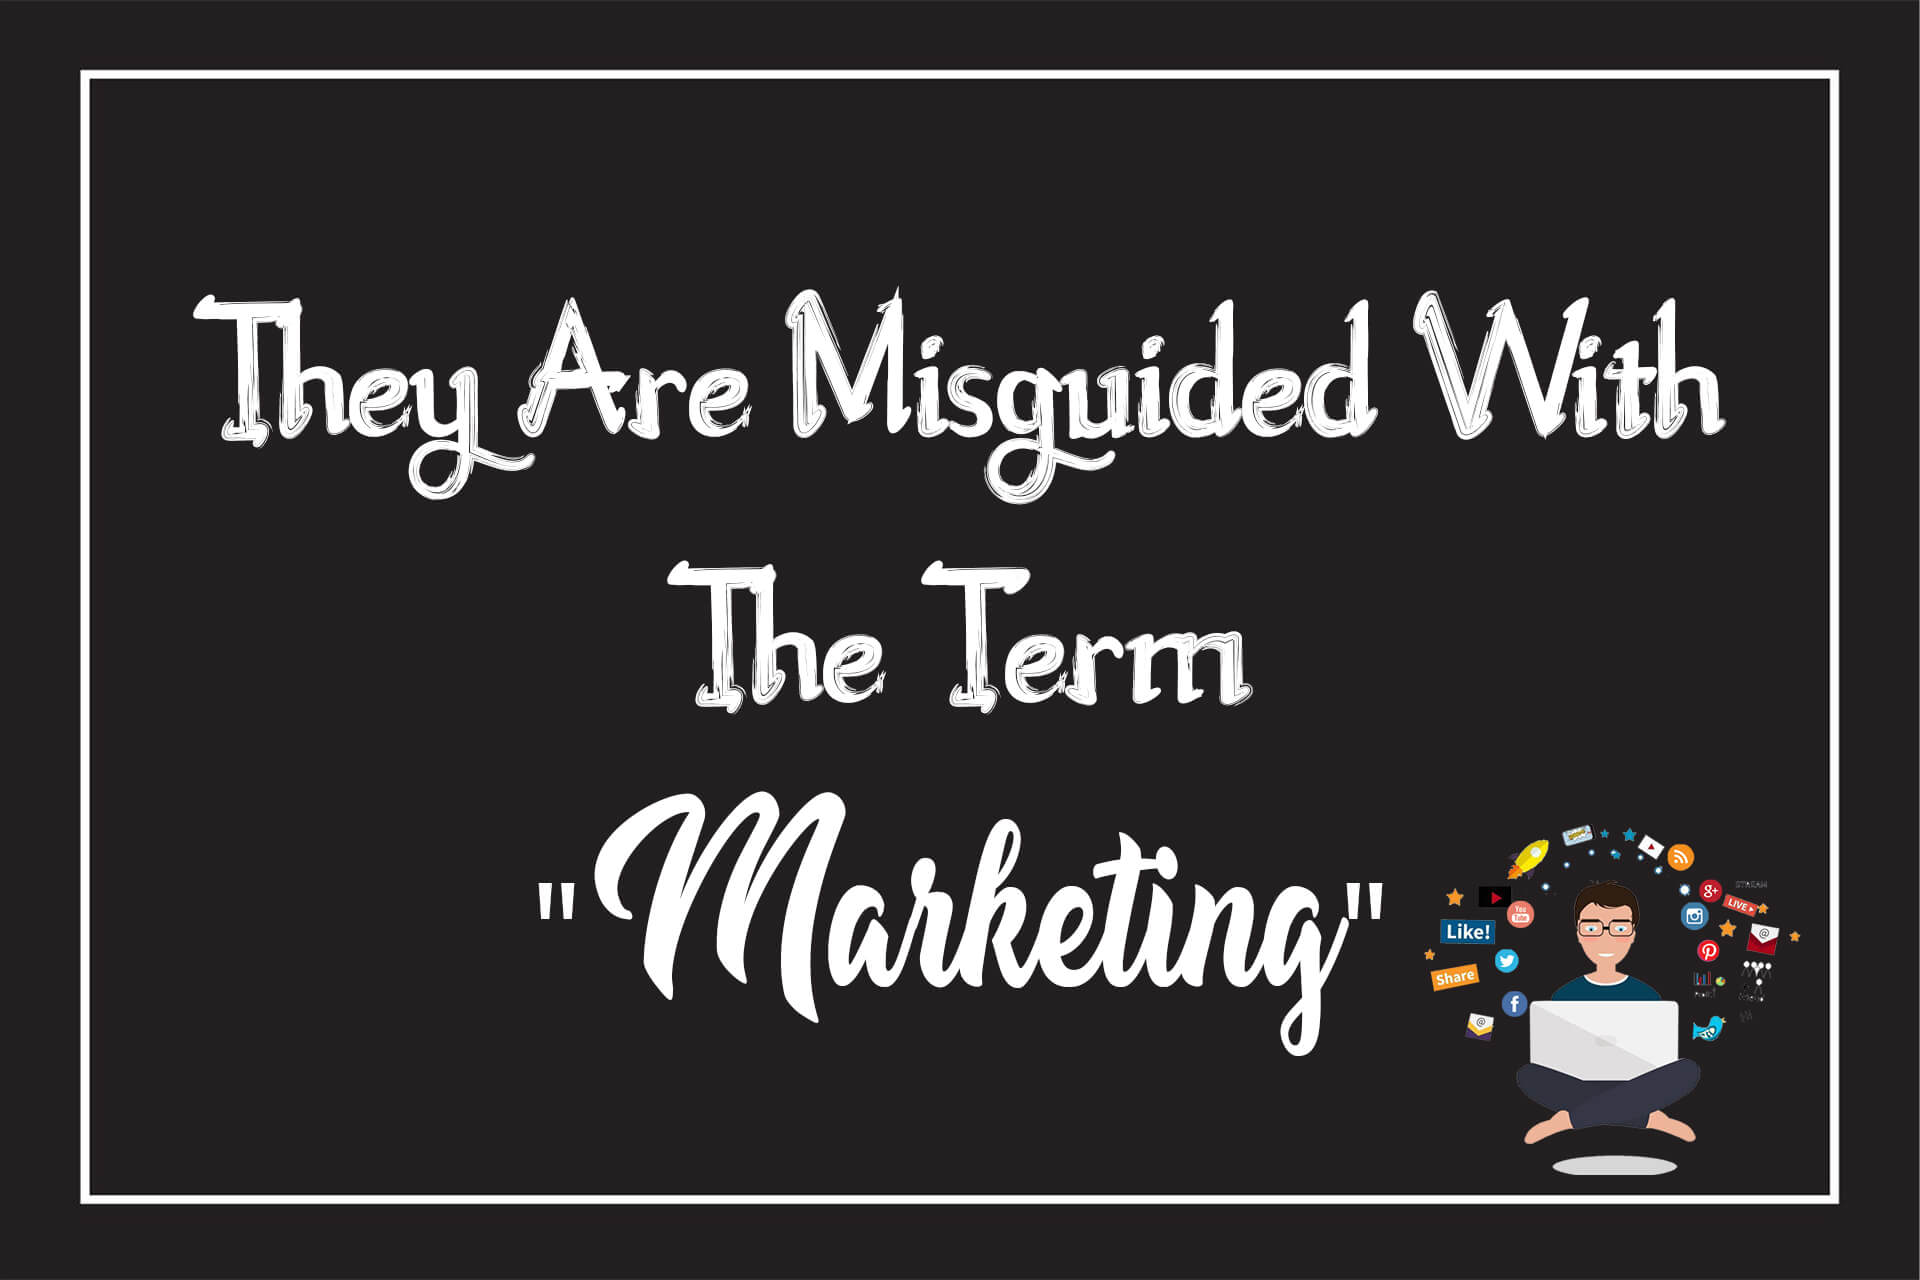 Business Mans Are Misguided With The Term “Marketing”